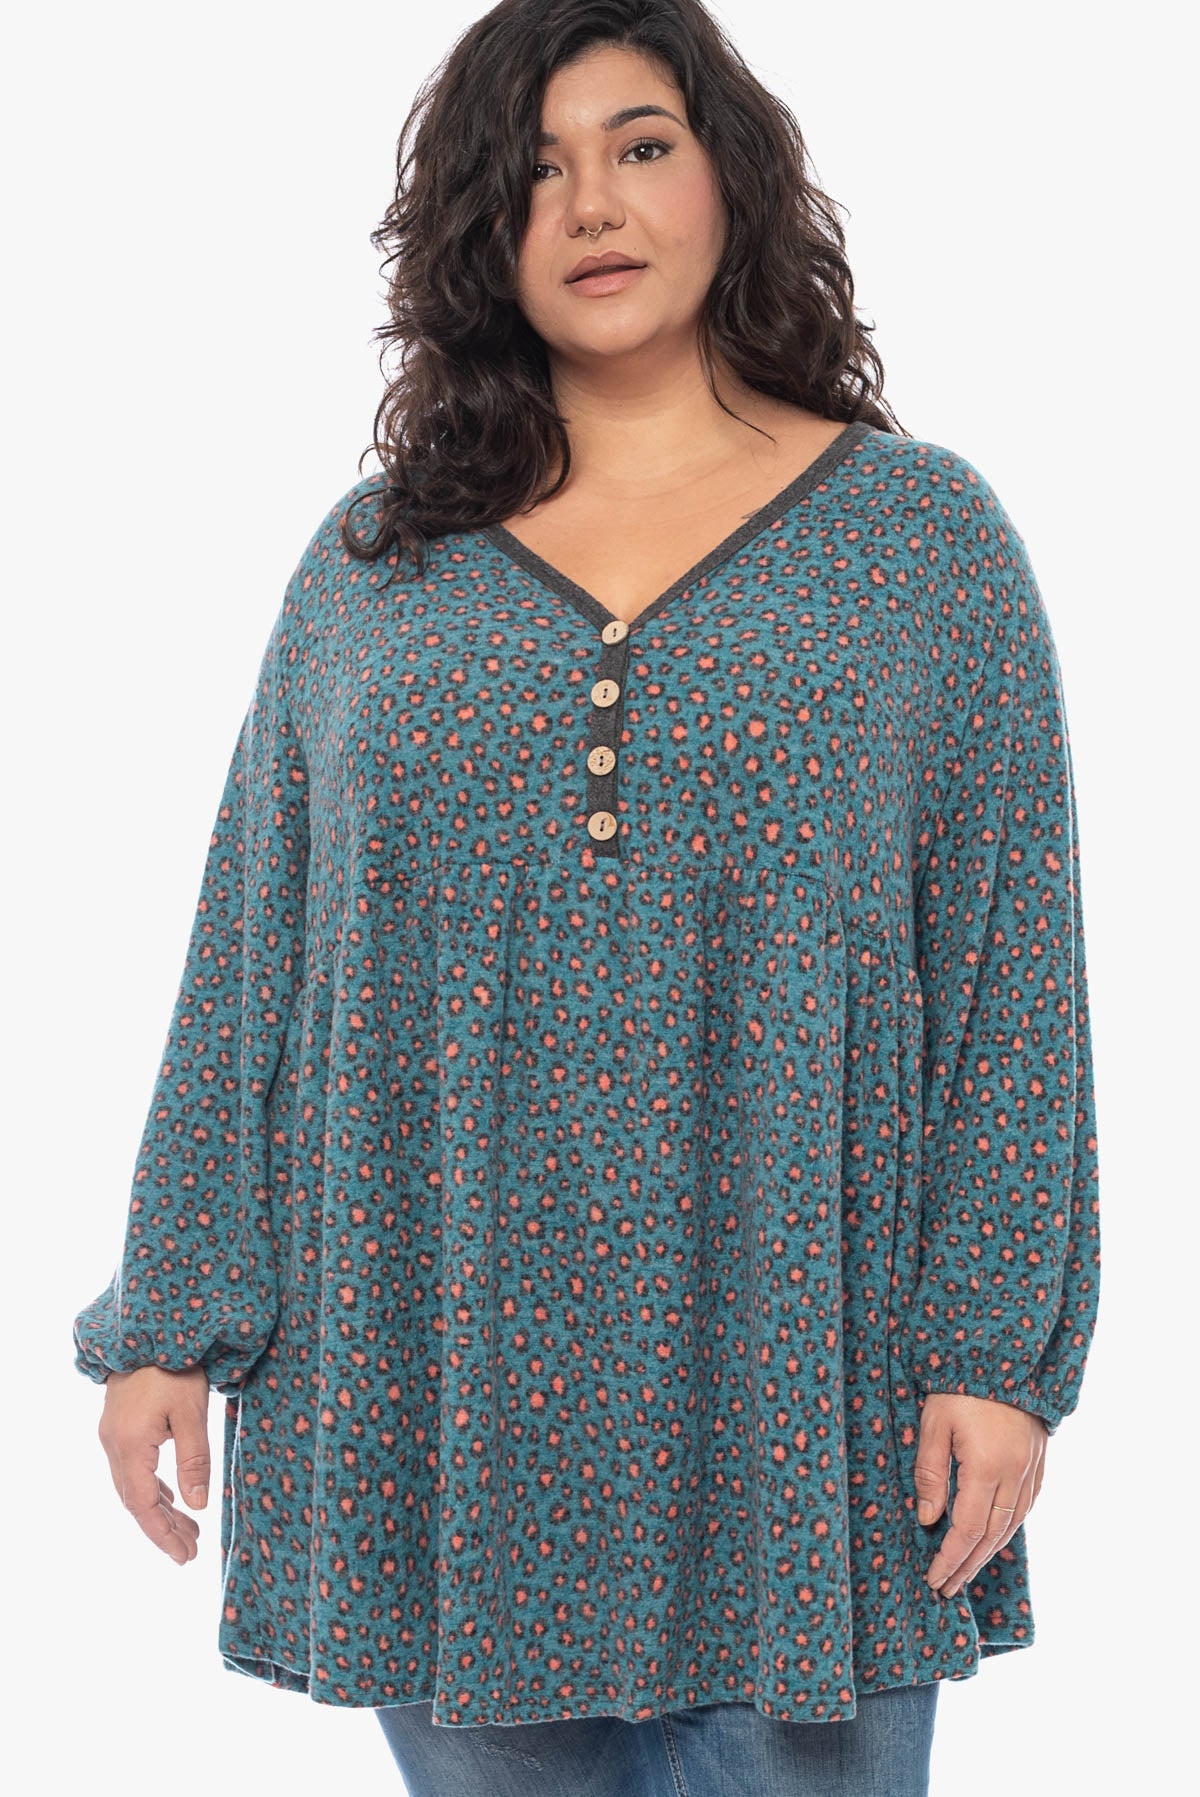 CASEY teal printed tunic